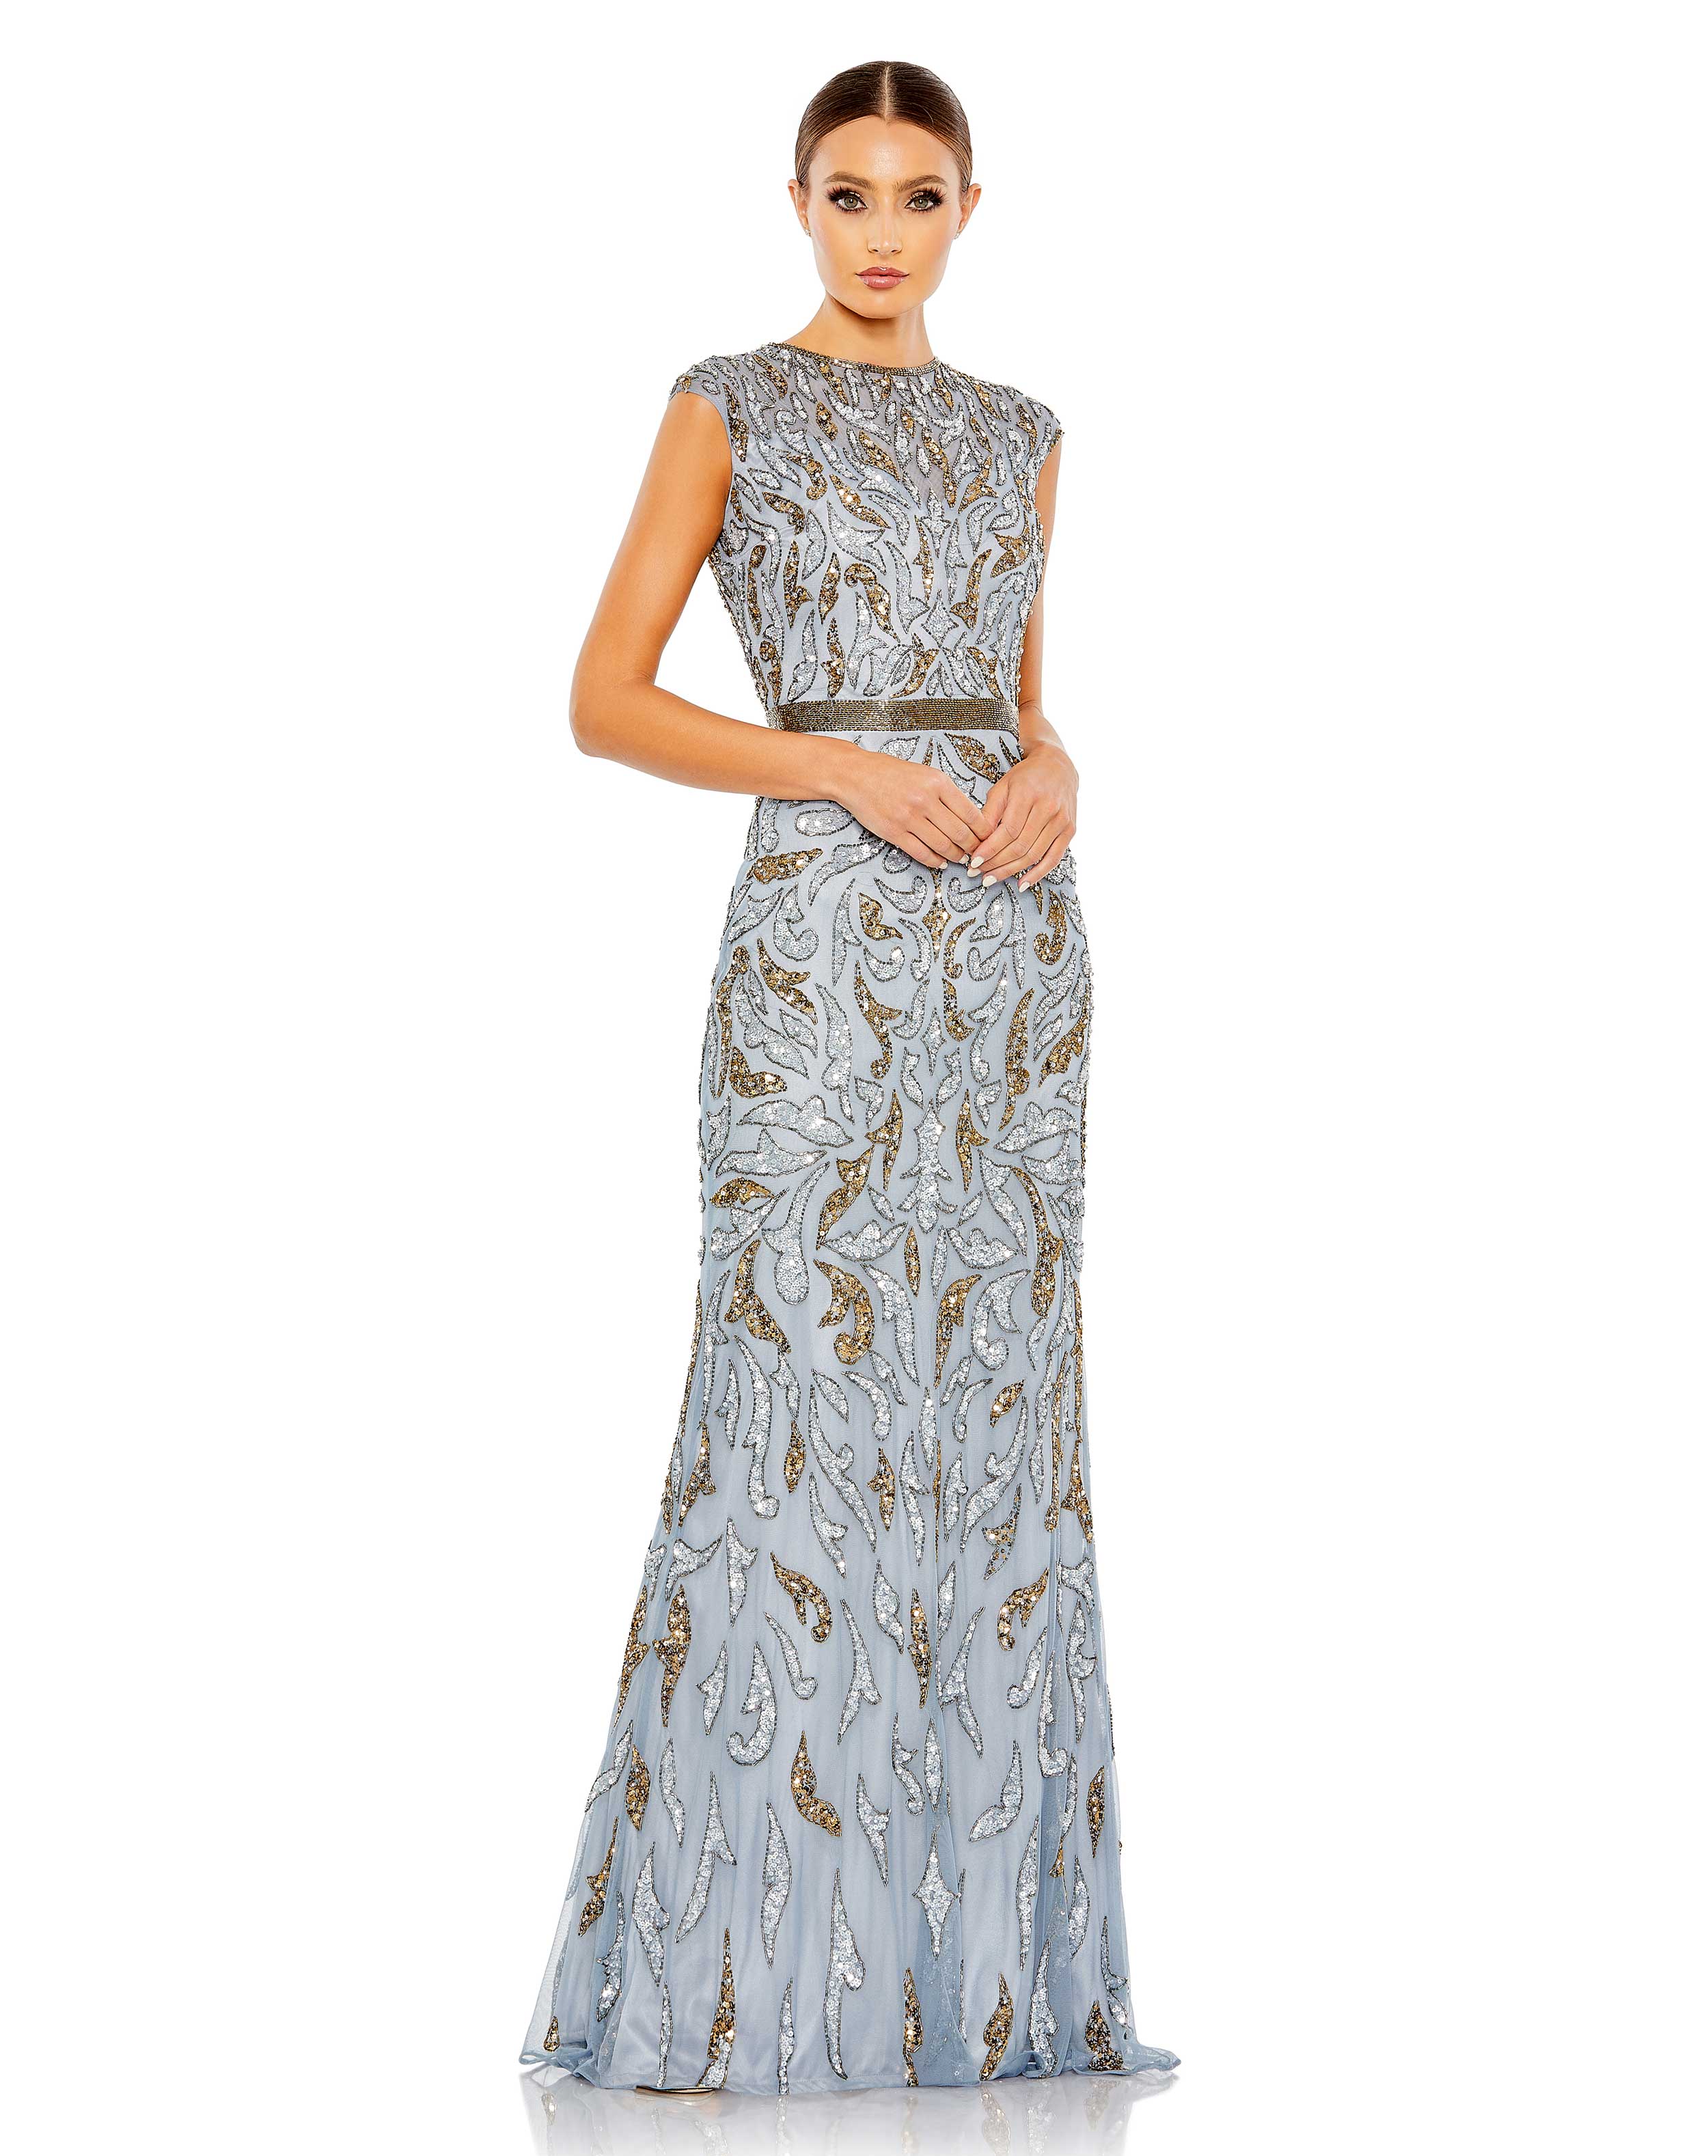 Embellished Illusion Cap Sleeve Column Gown